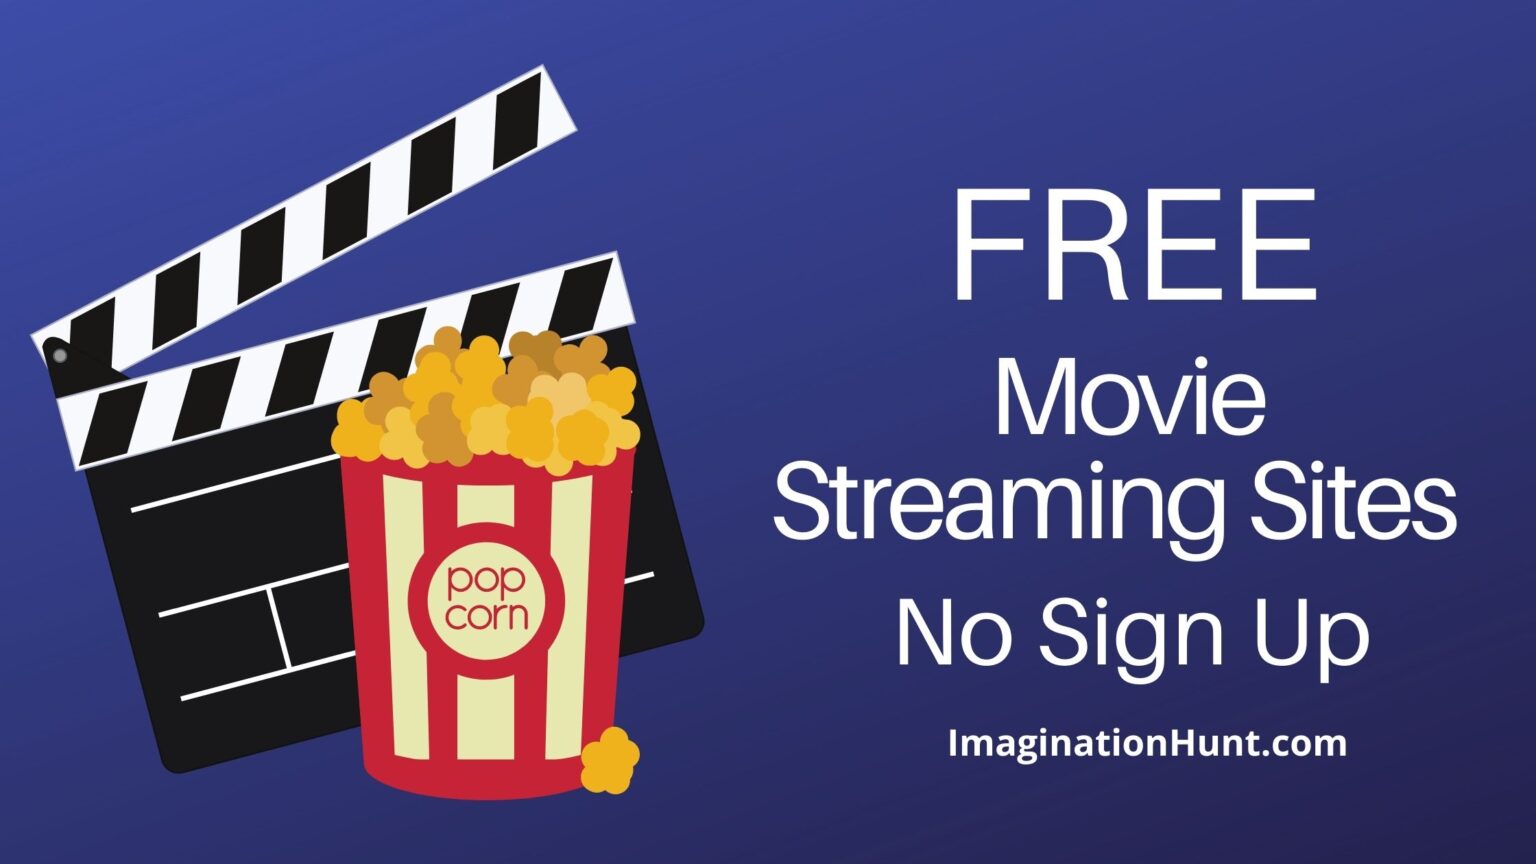 free full movie downloads no sign up